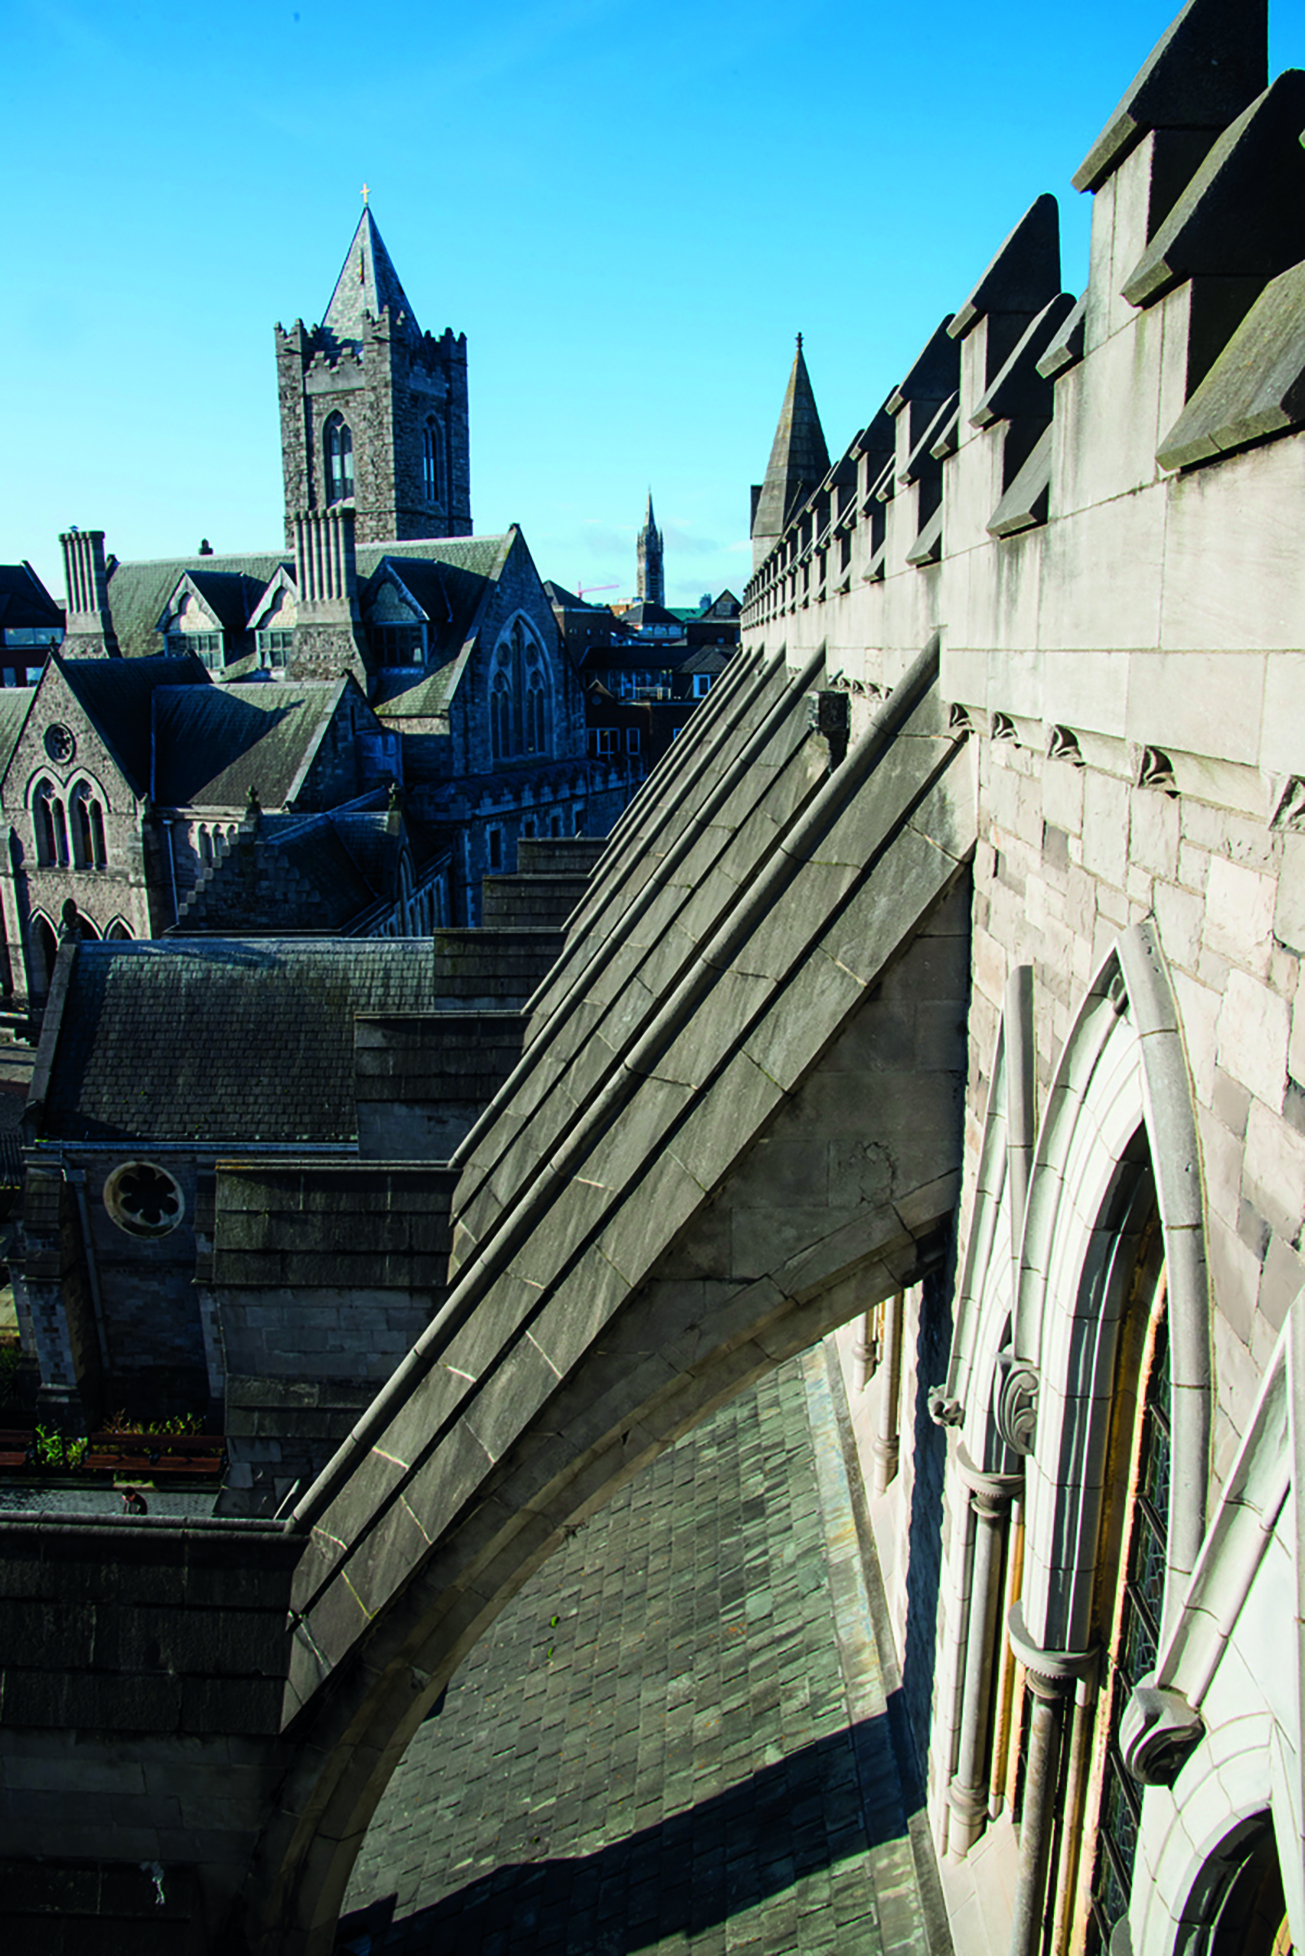 Views from Christchurch cathedral Dublin